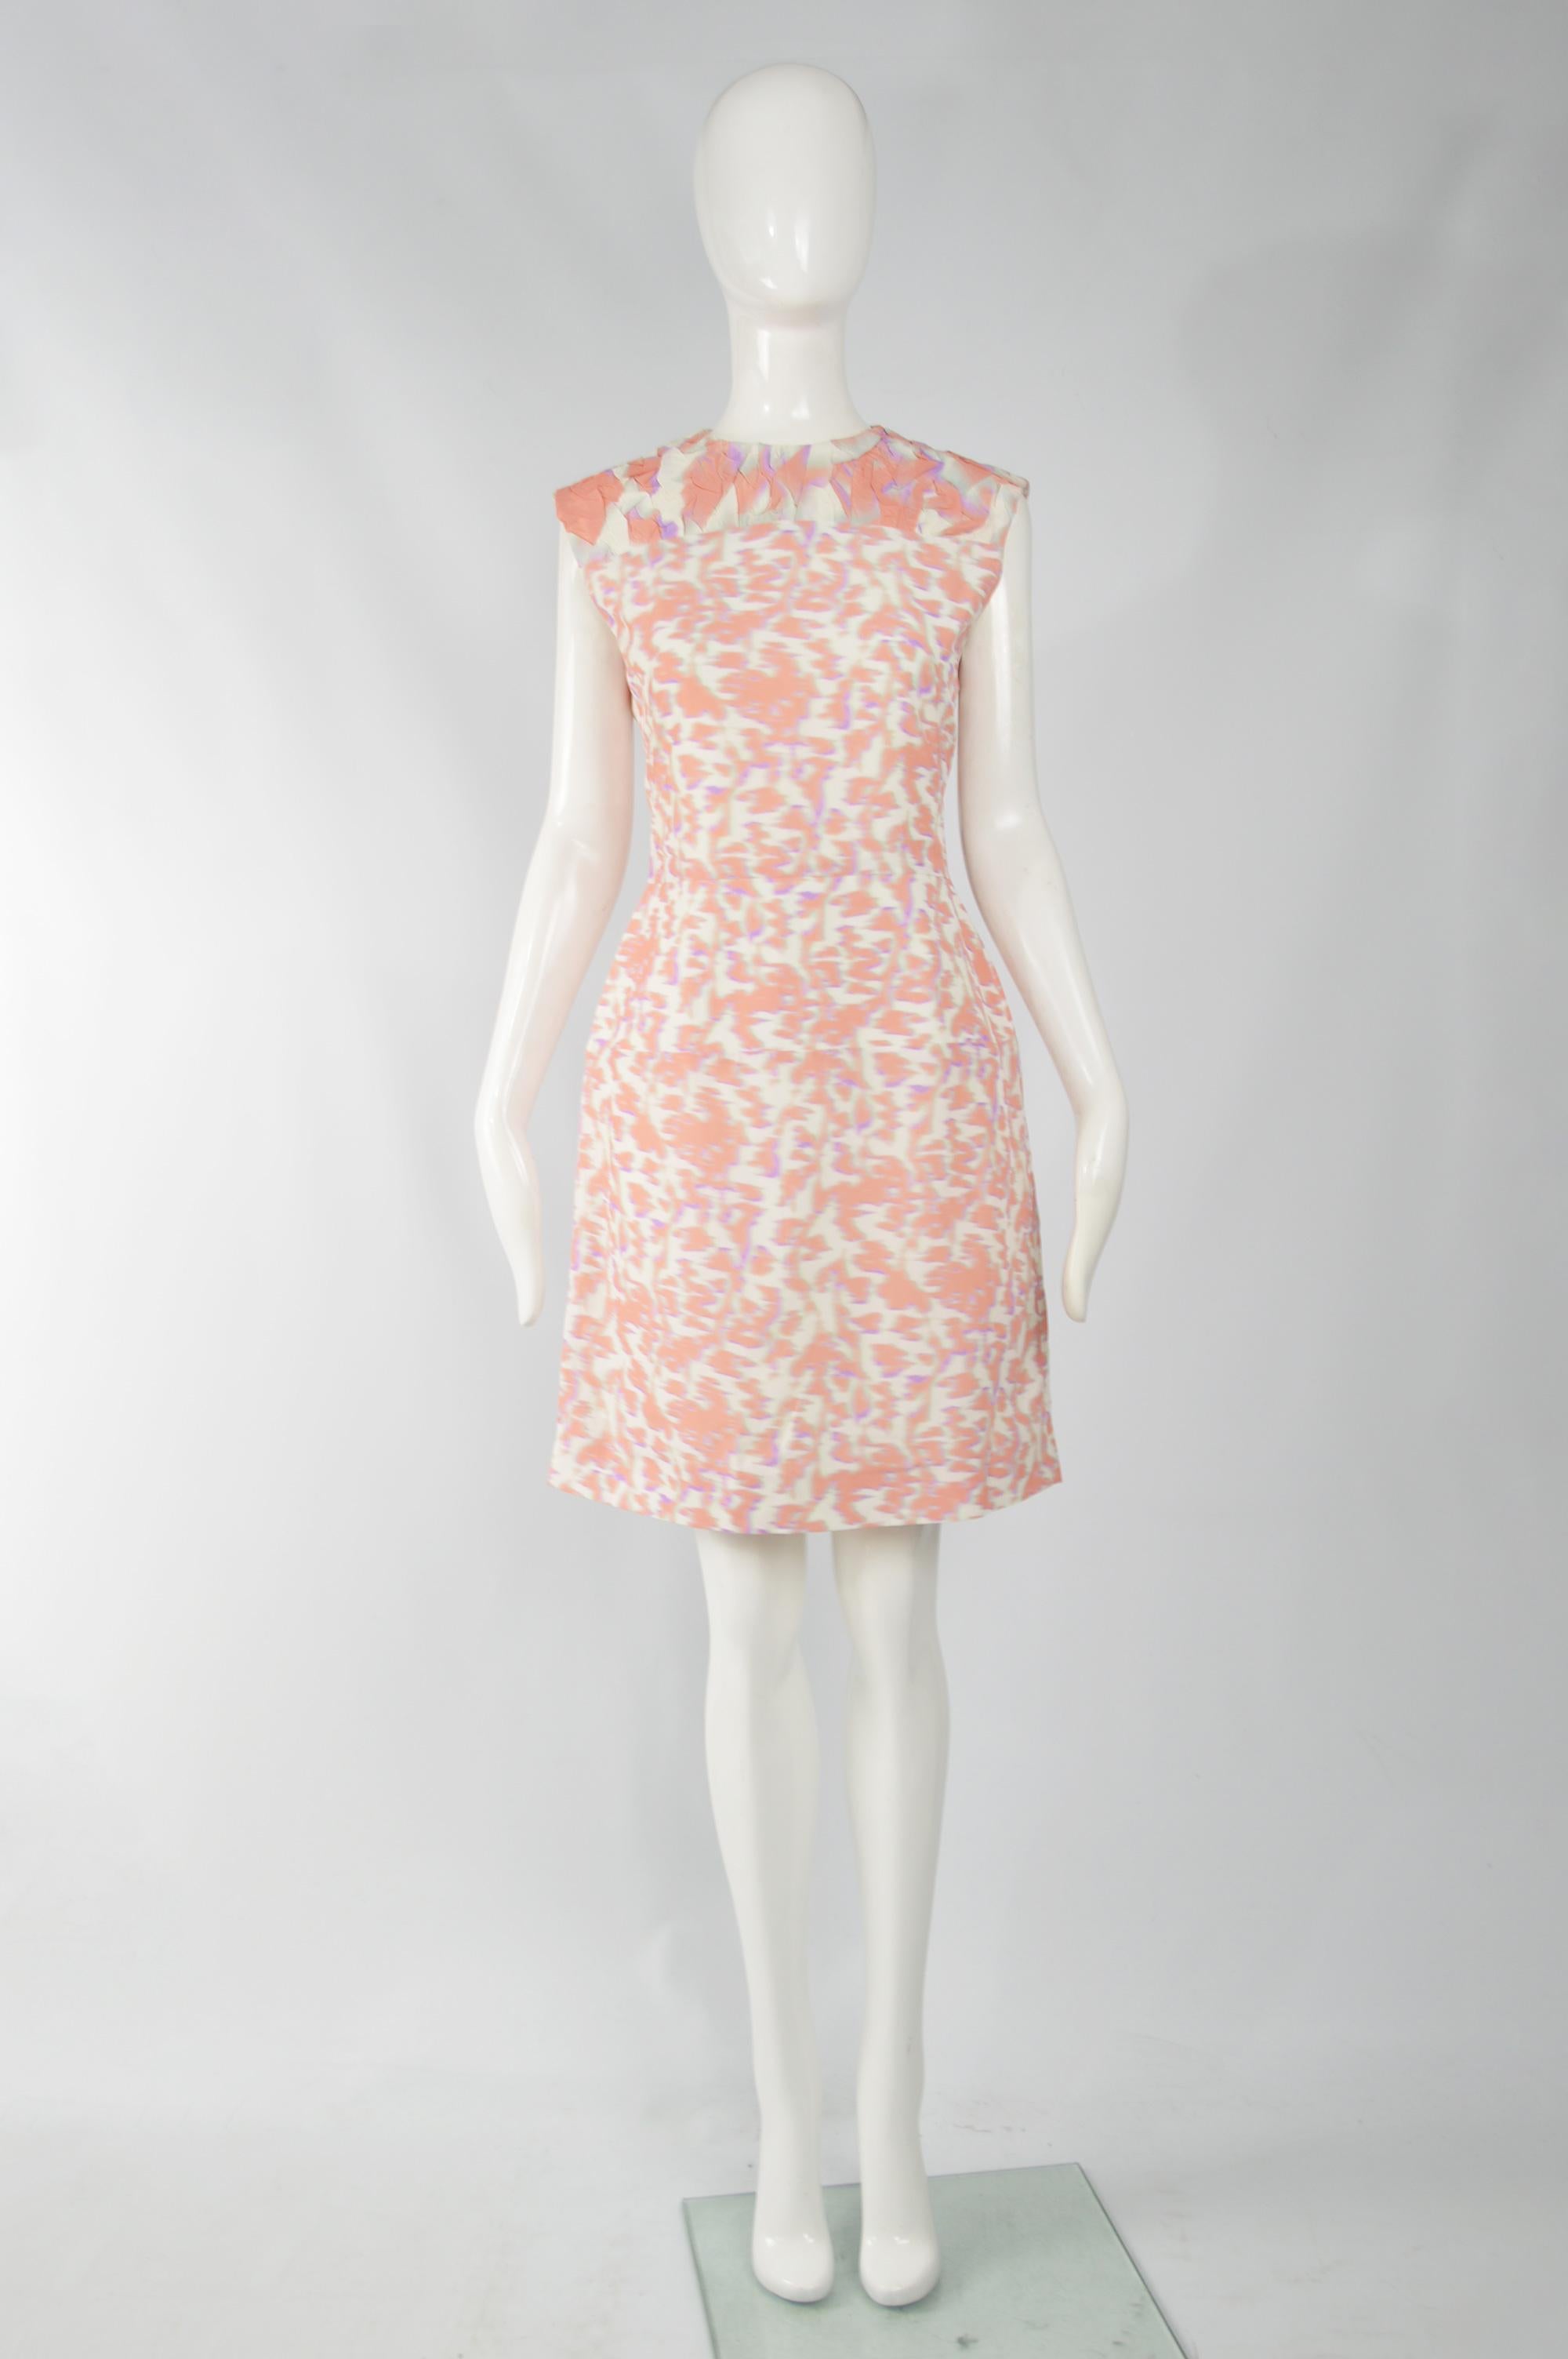 A stunning Balenciaga dress from the Spring Summer 2014 collection, designed by Alexander Wang. In a white, peach and purple acetate-silk blend with a textured, cloqué top and structured hips. Perfect for the day or at a party in the evening.

Size: